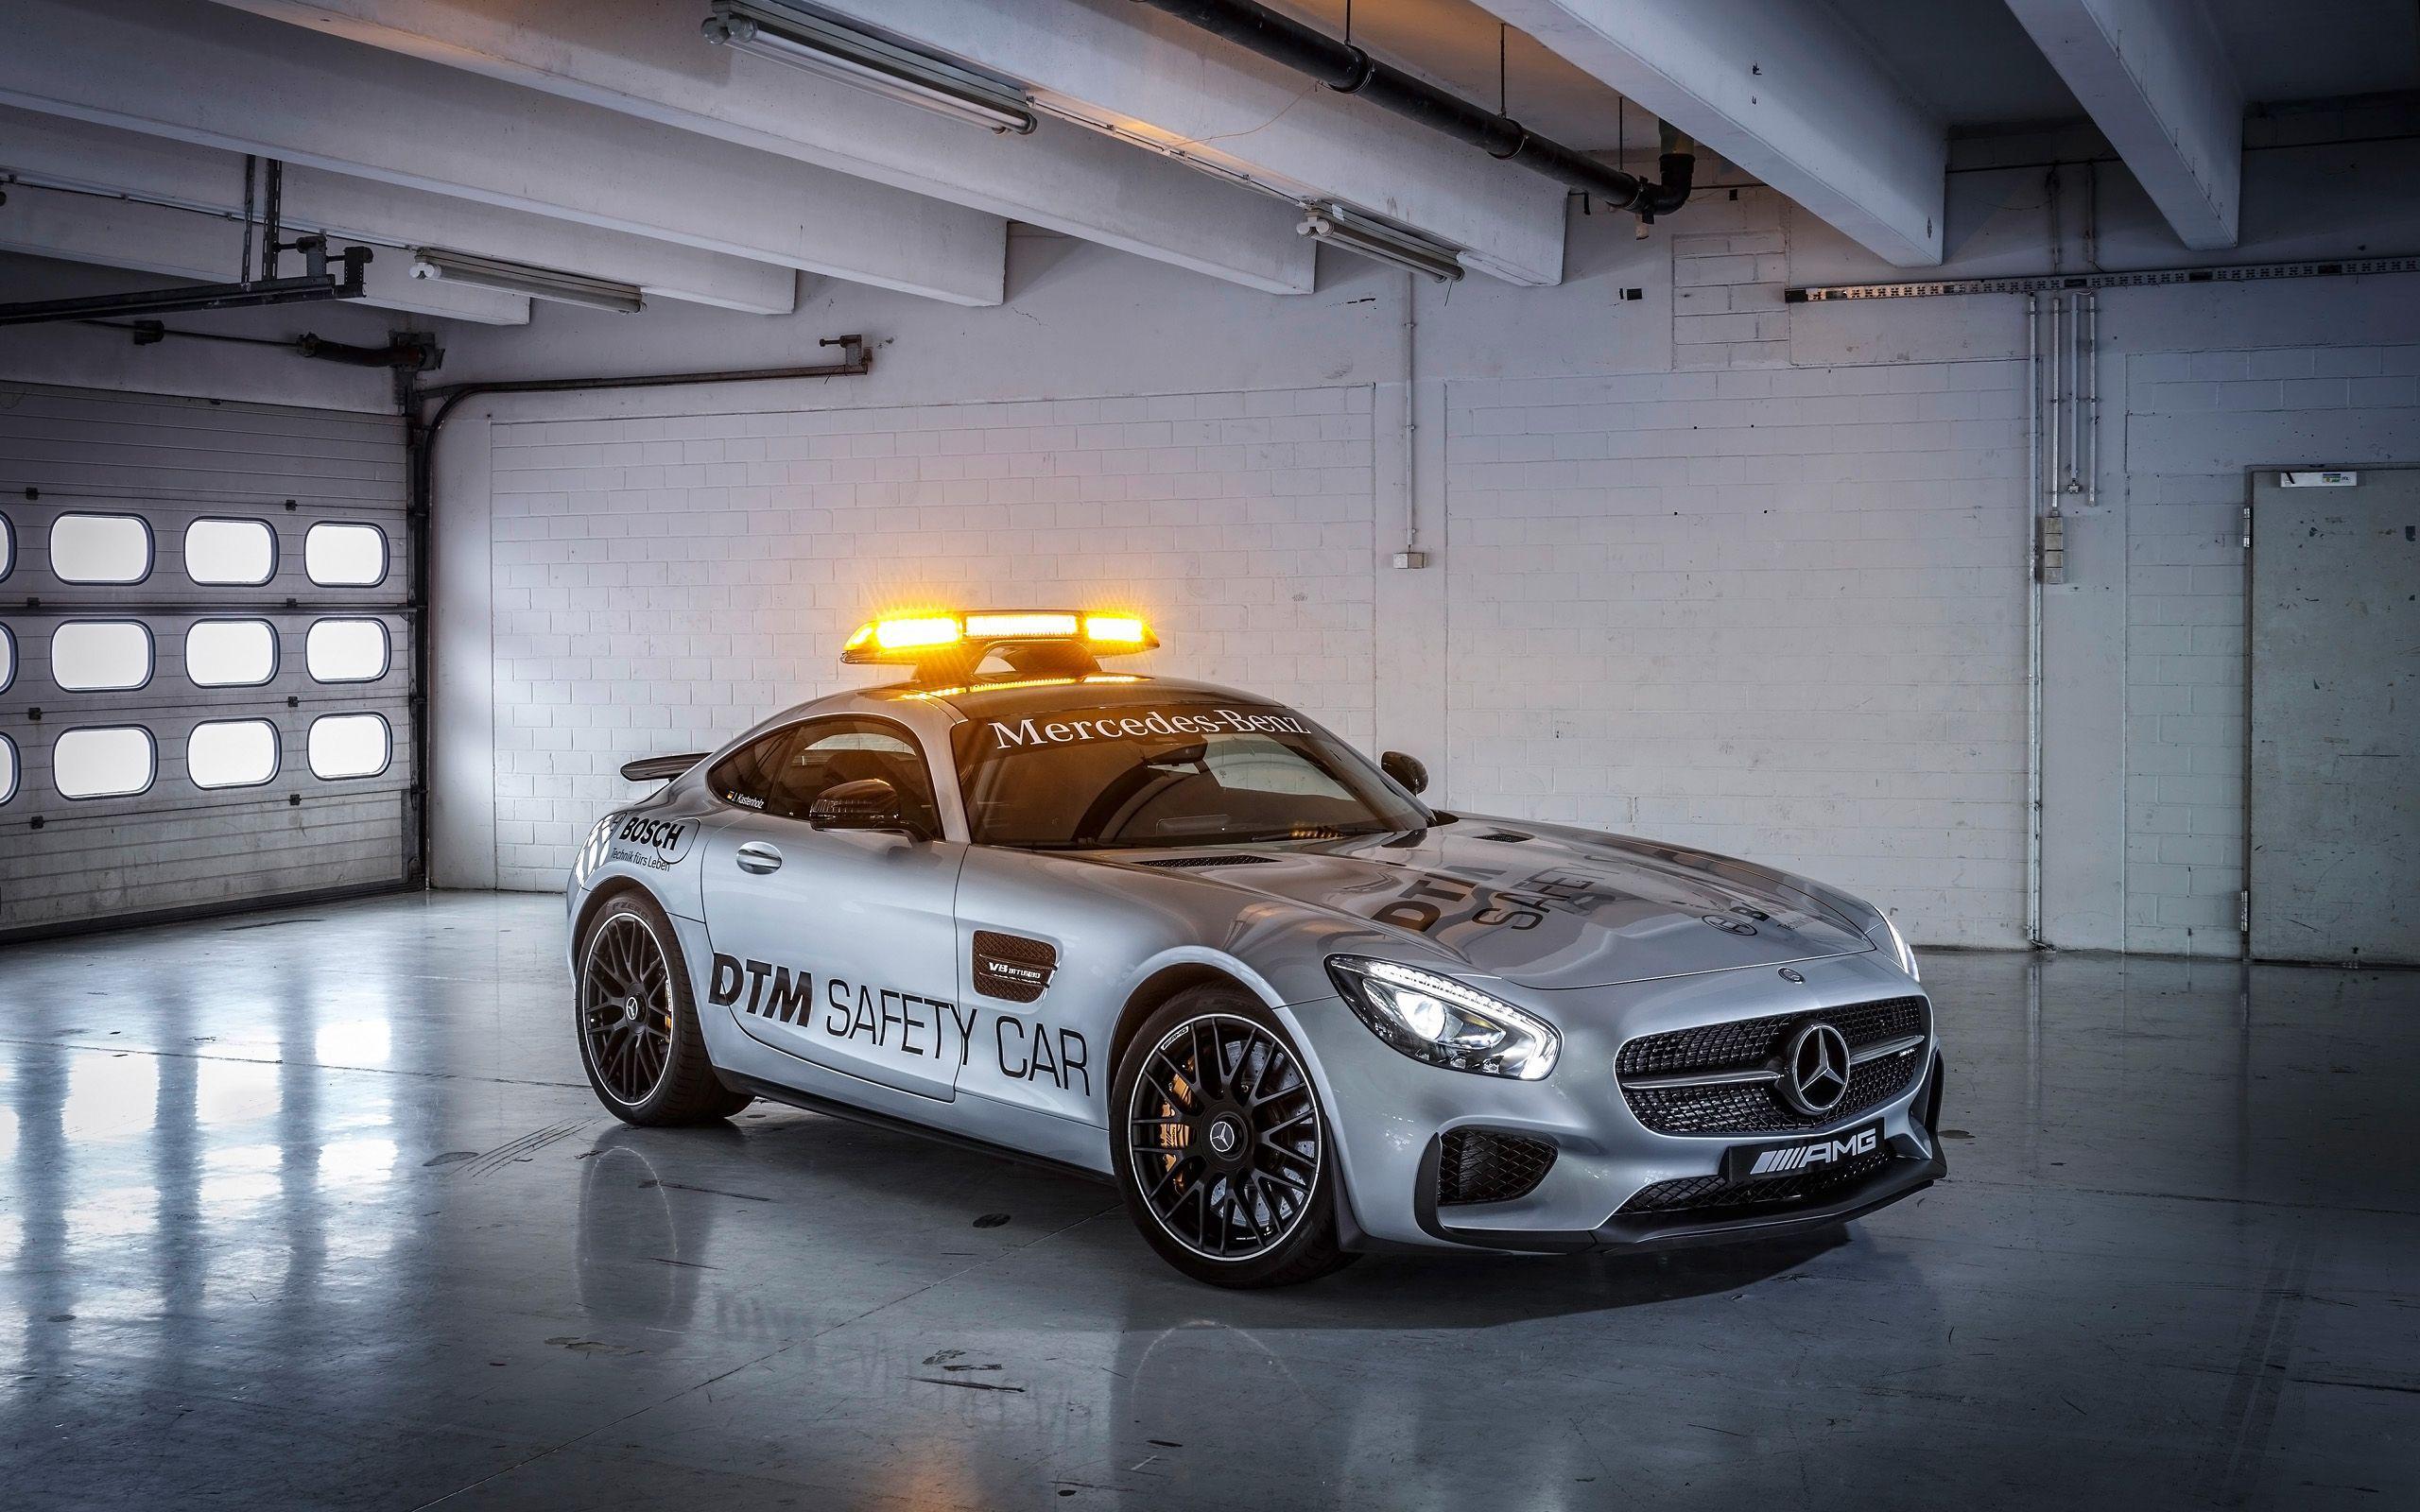 Wallpaper Tagged With SAFETY. SAFETY Car Wallpaper, Image